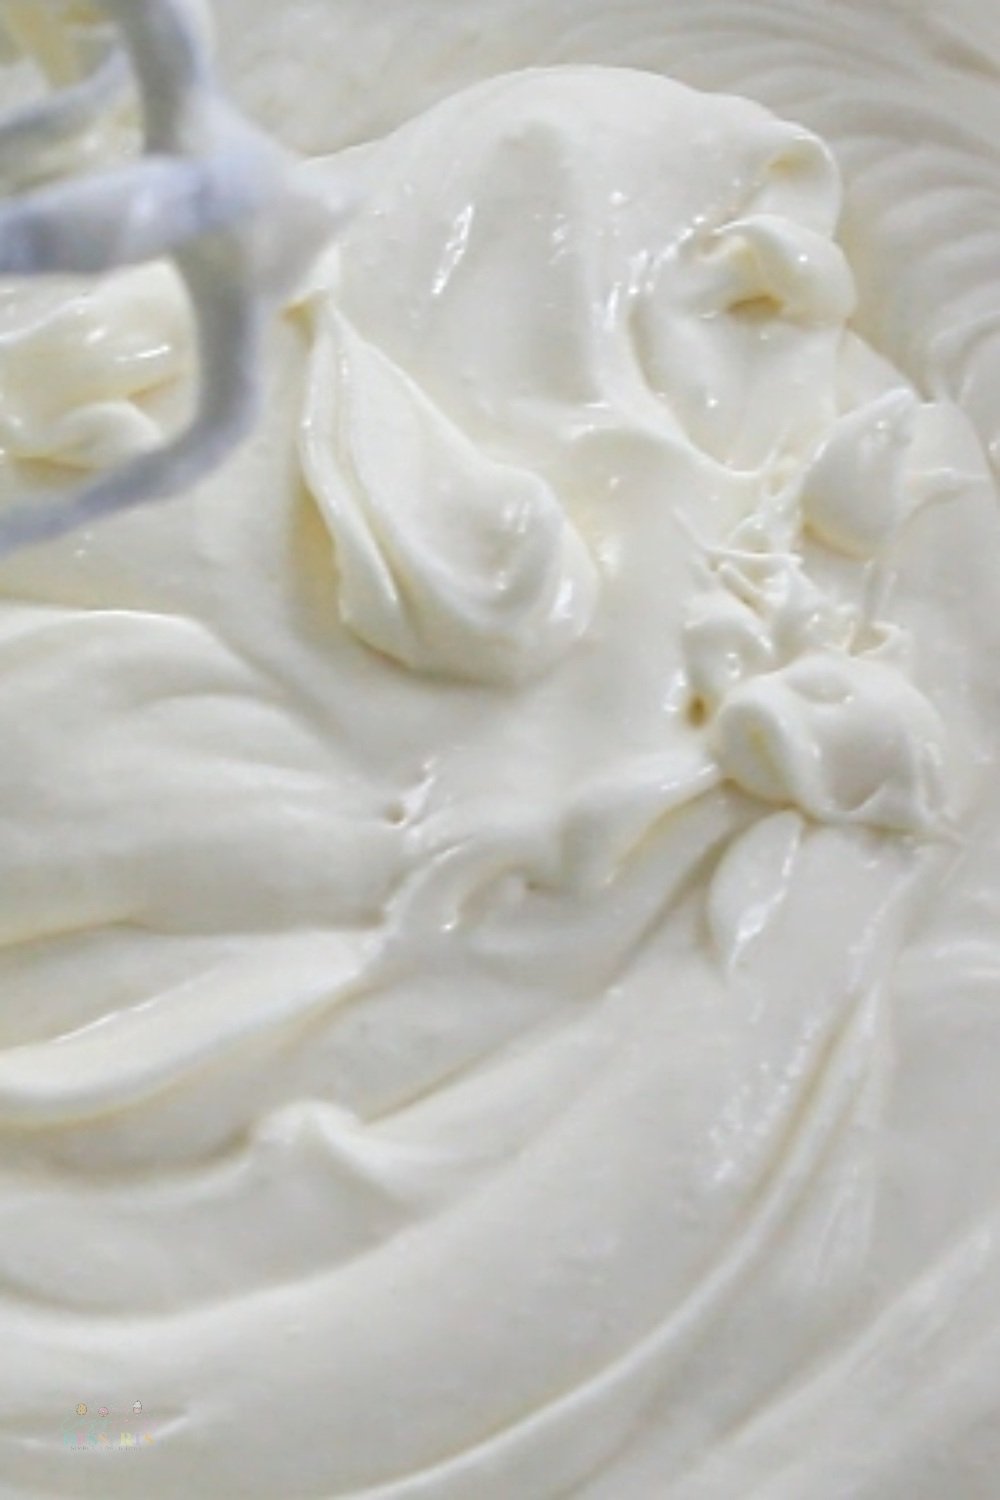 Easy cream cheese frosting